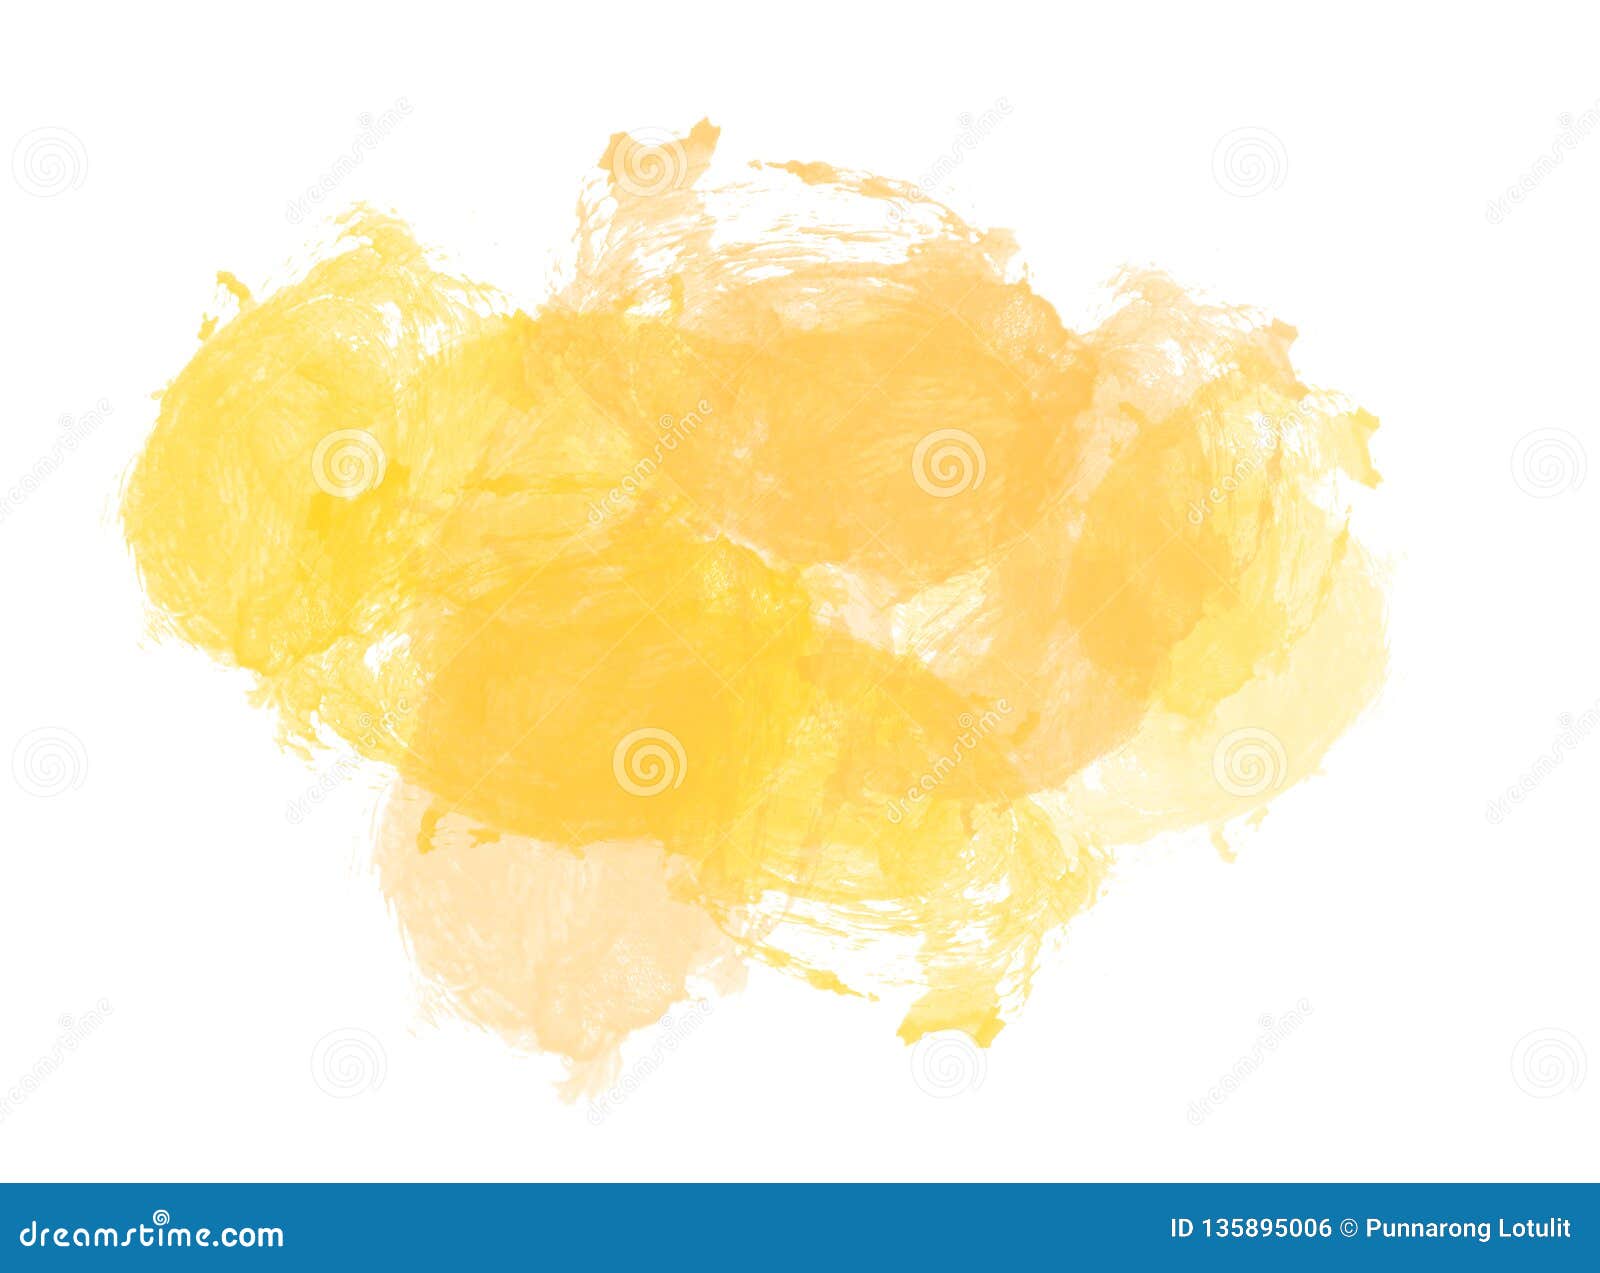 Watercolor Illustration Painting Background and Backdrop Stock ...